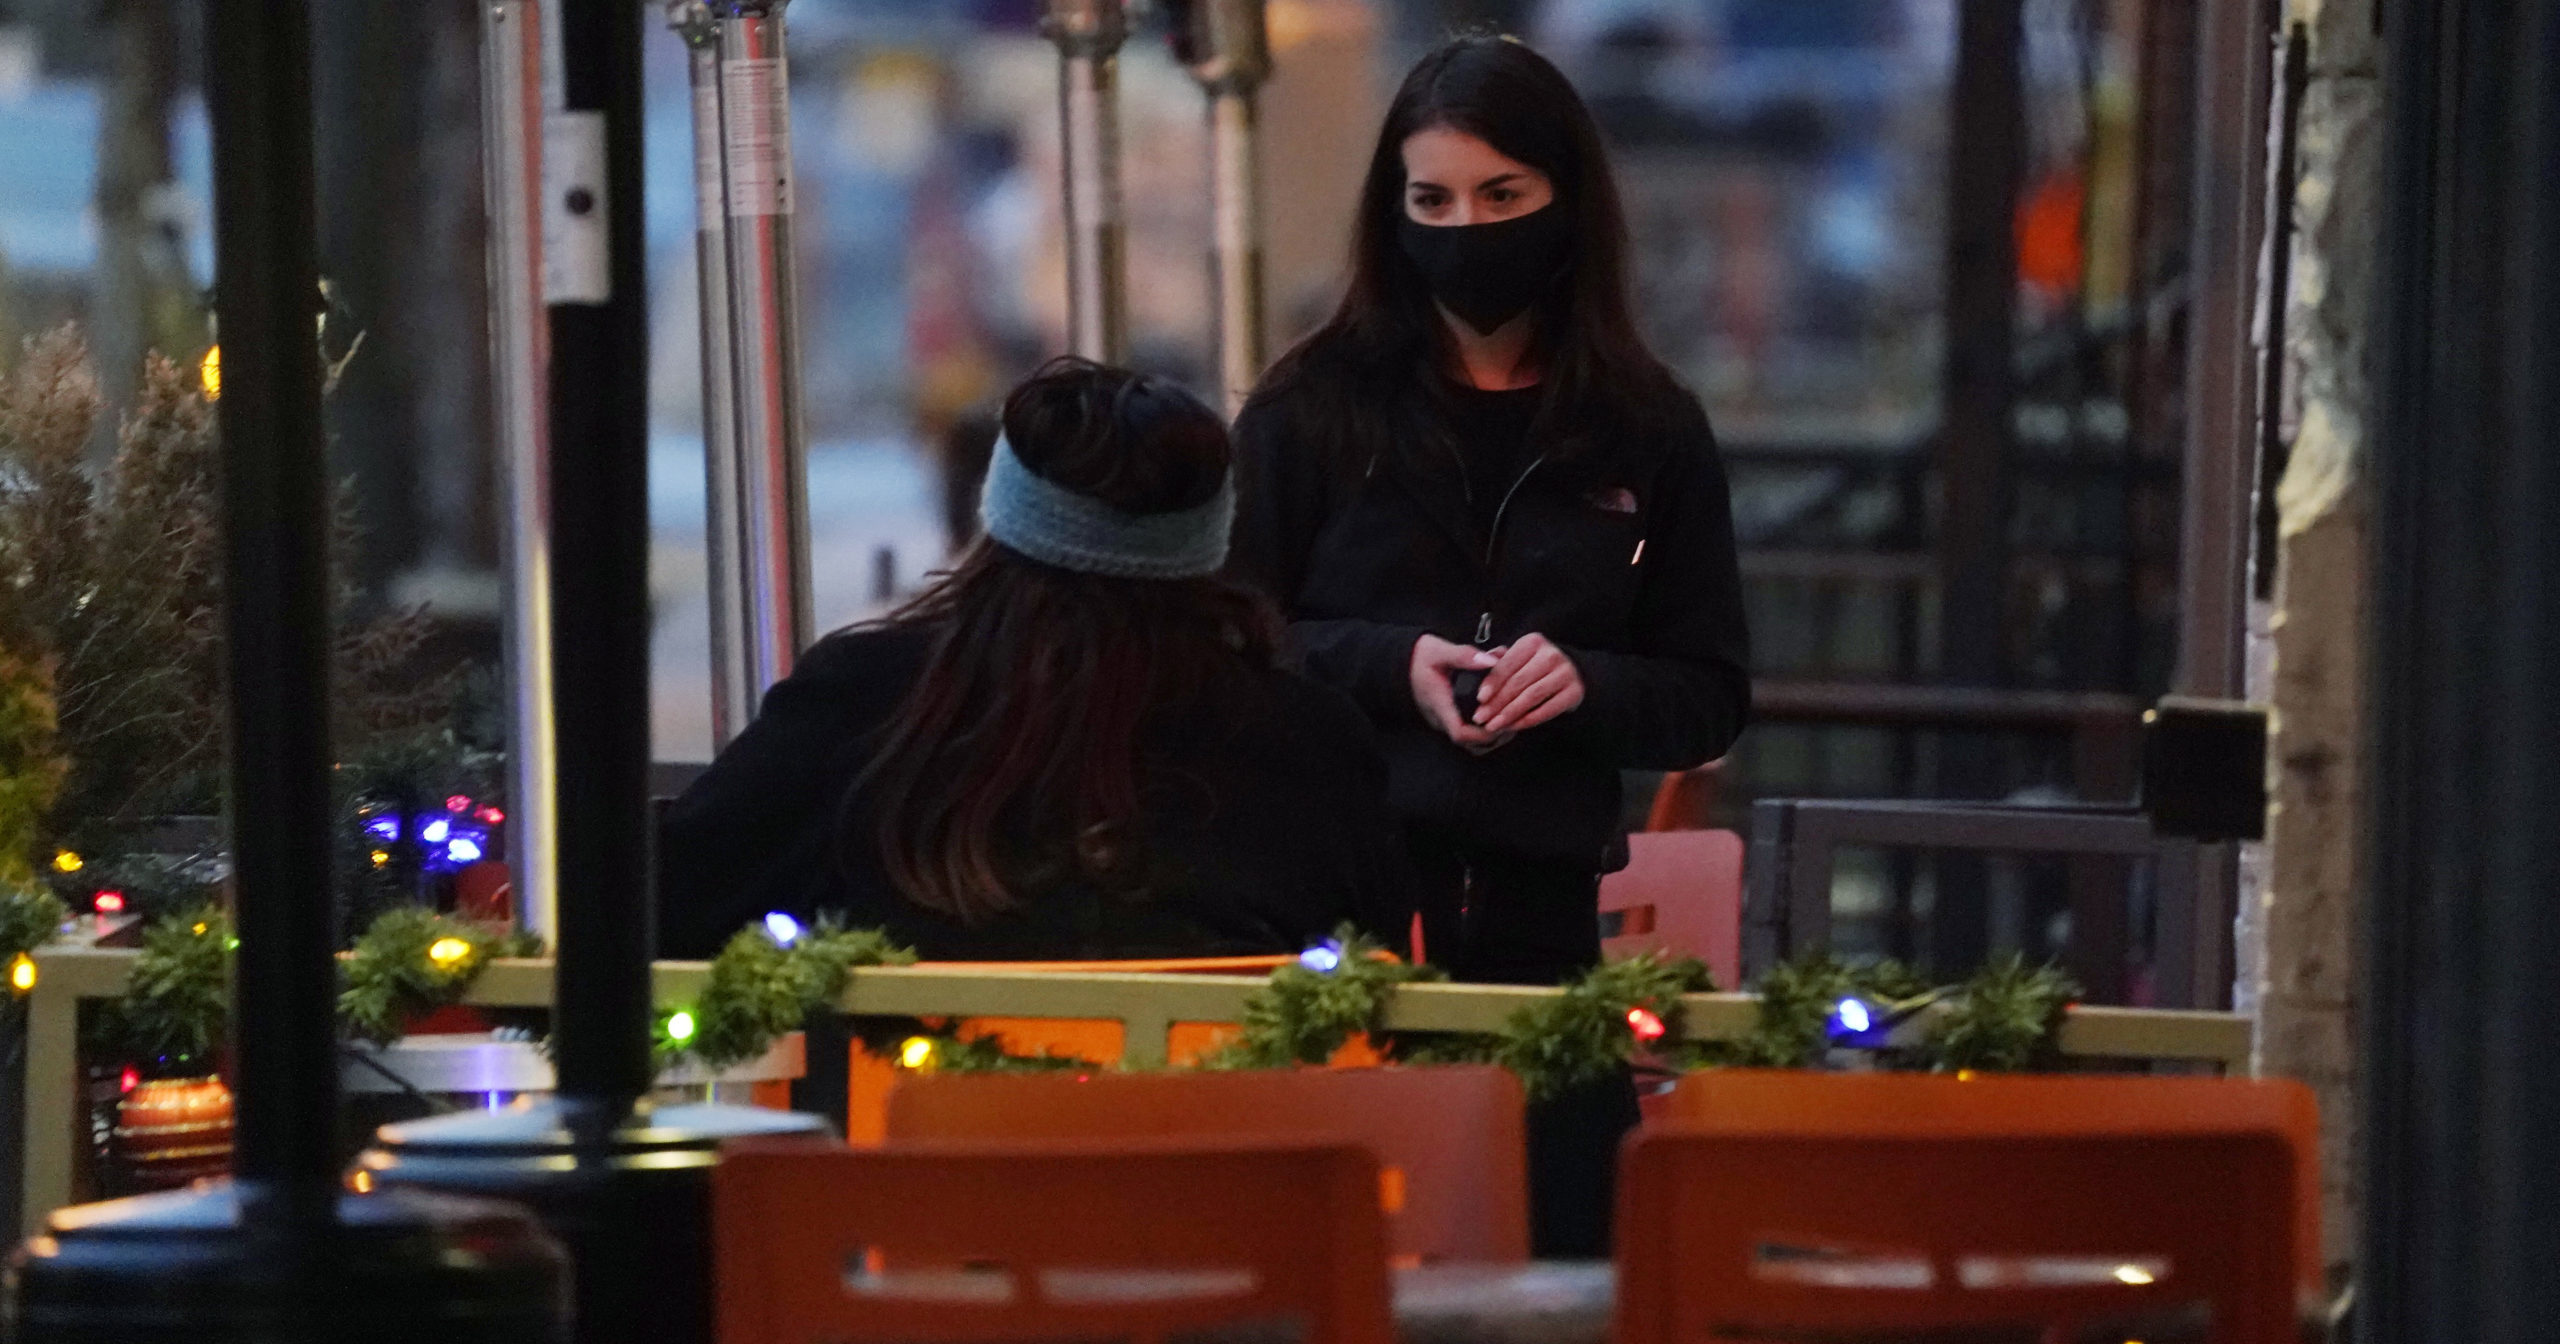 A waitperson wears a face mask while tending to a patron sitting in the outdoor patio of a sushi restaurant on Dec. 28, 2020, in downtown Denver.